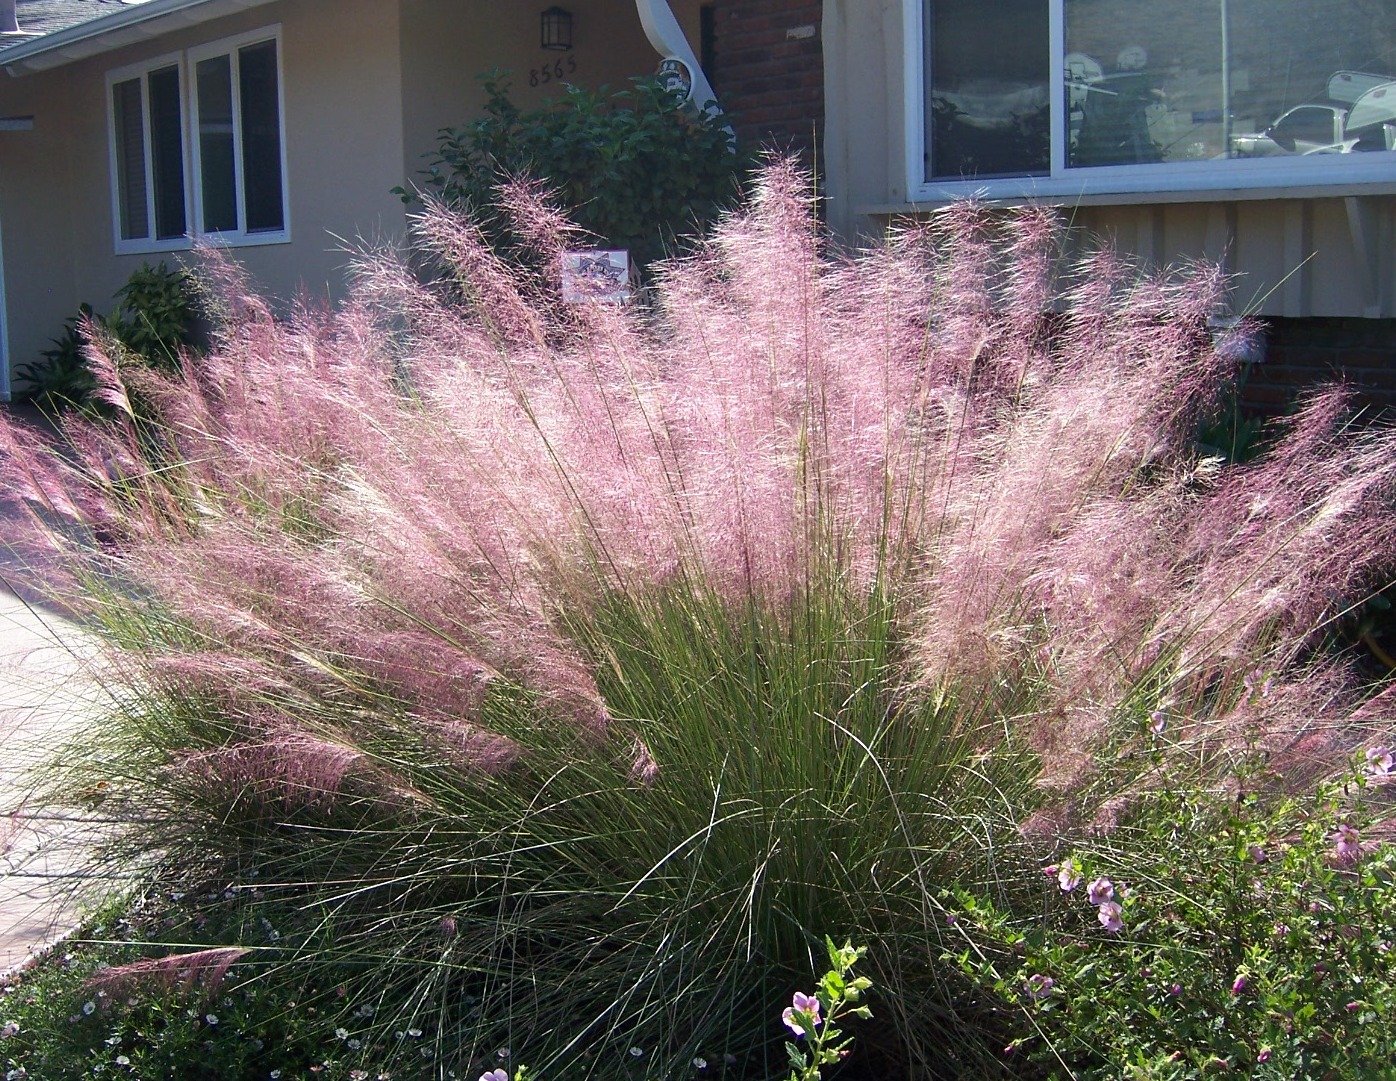 grass muhly pink ornamental muhlenbergia grasses capillaris cotton candy plants garden plumes container landscaping try fall low plant tolerant drought